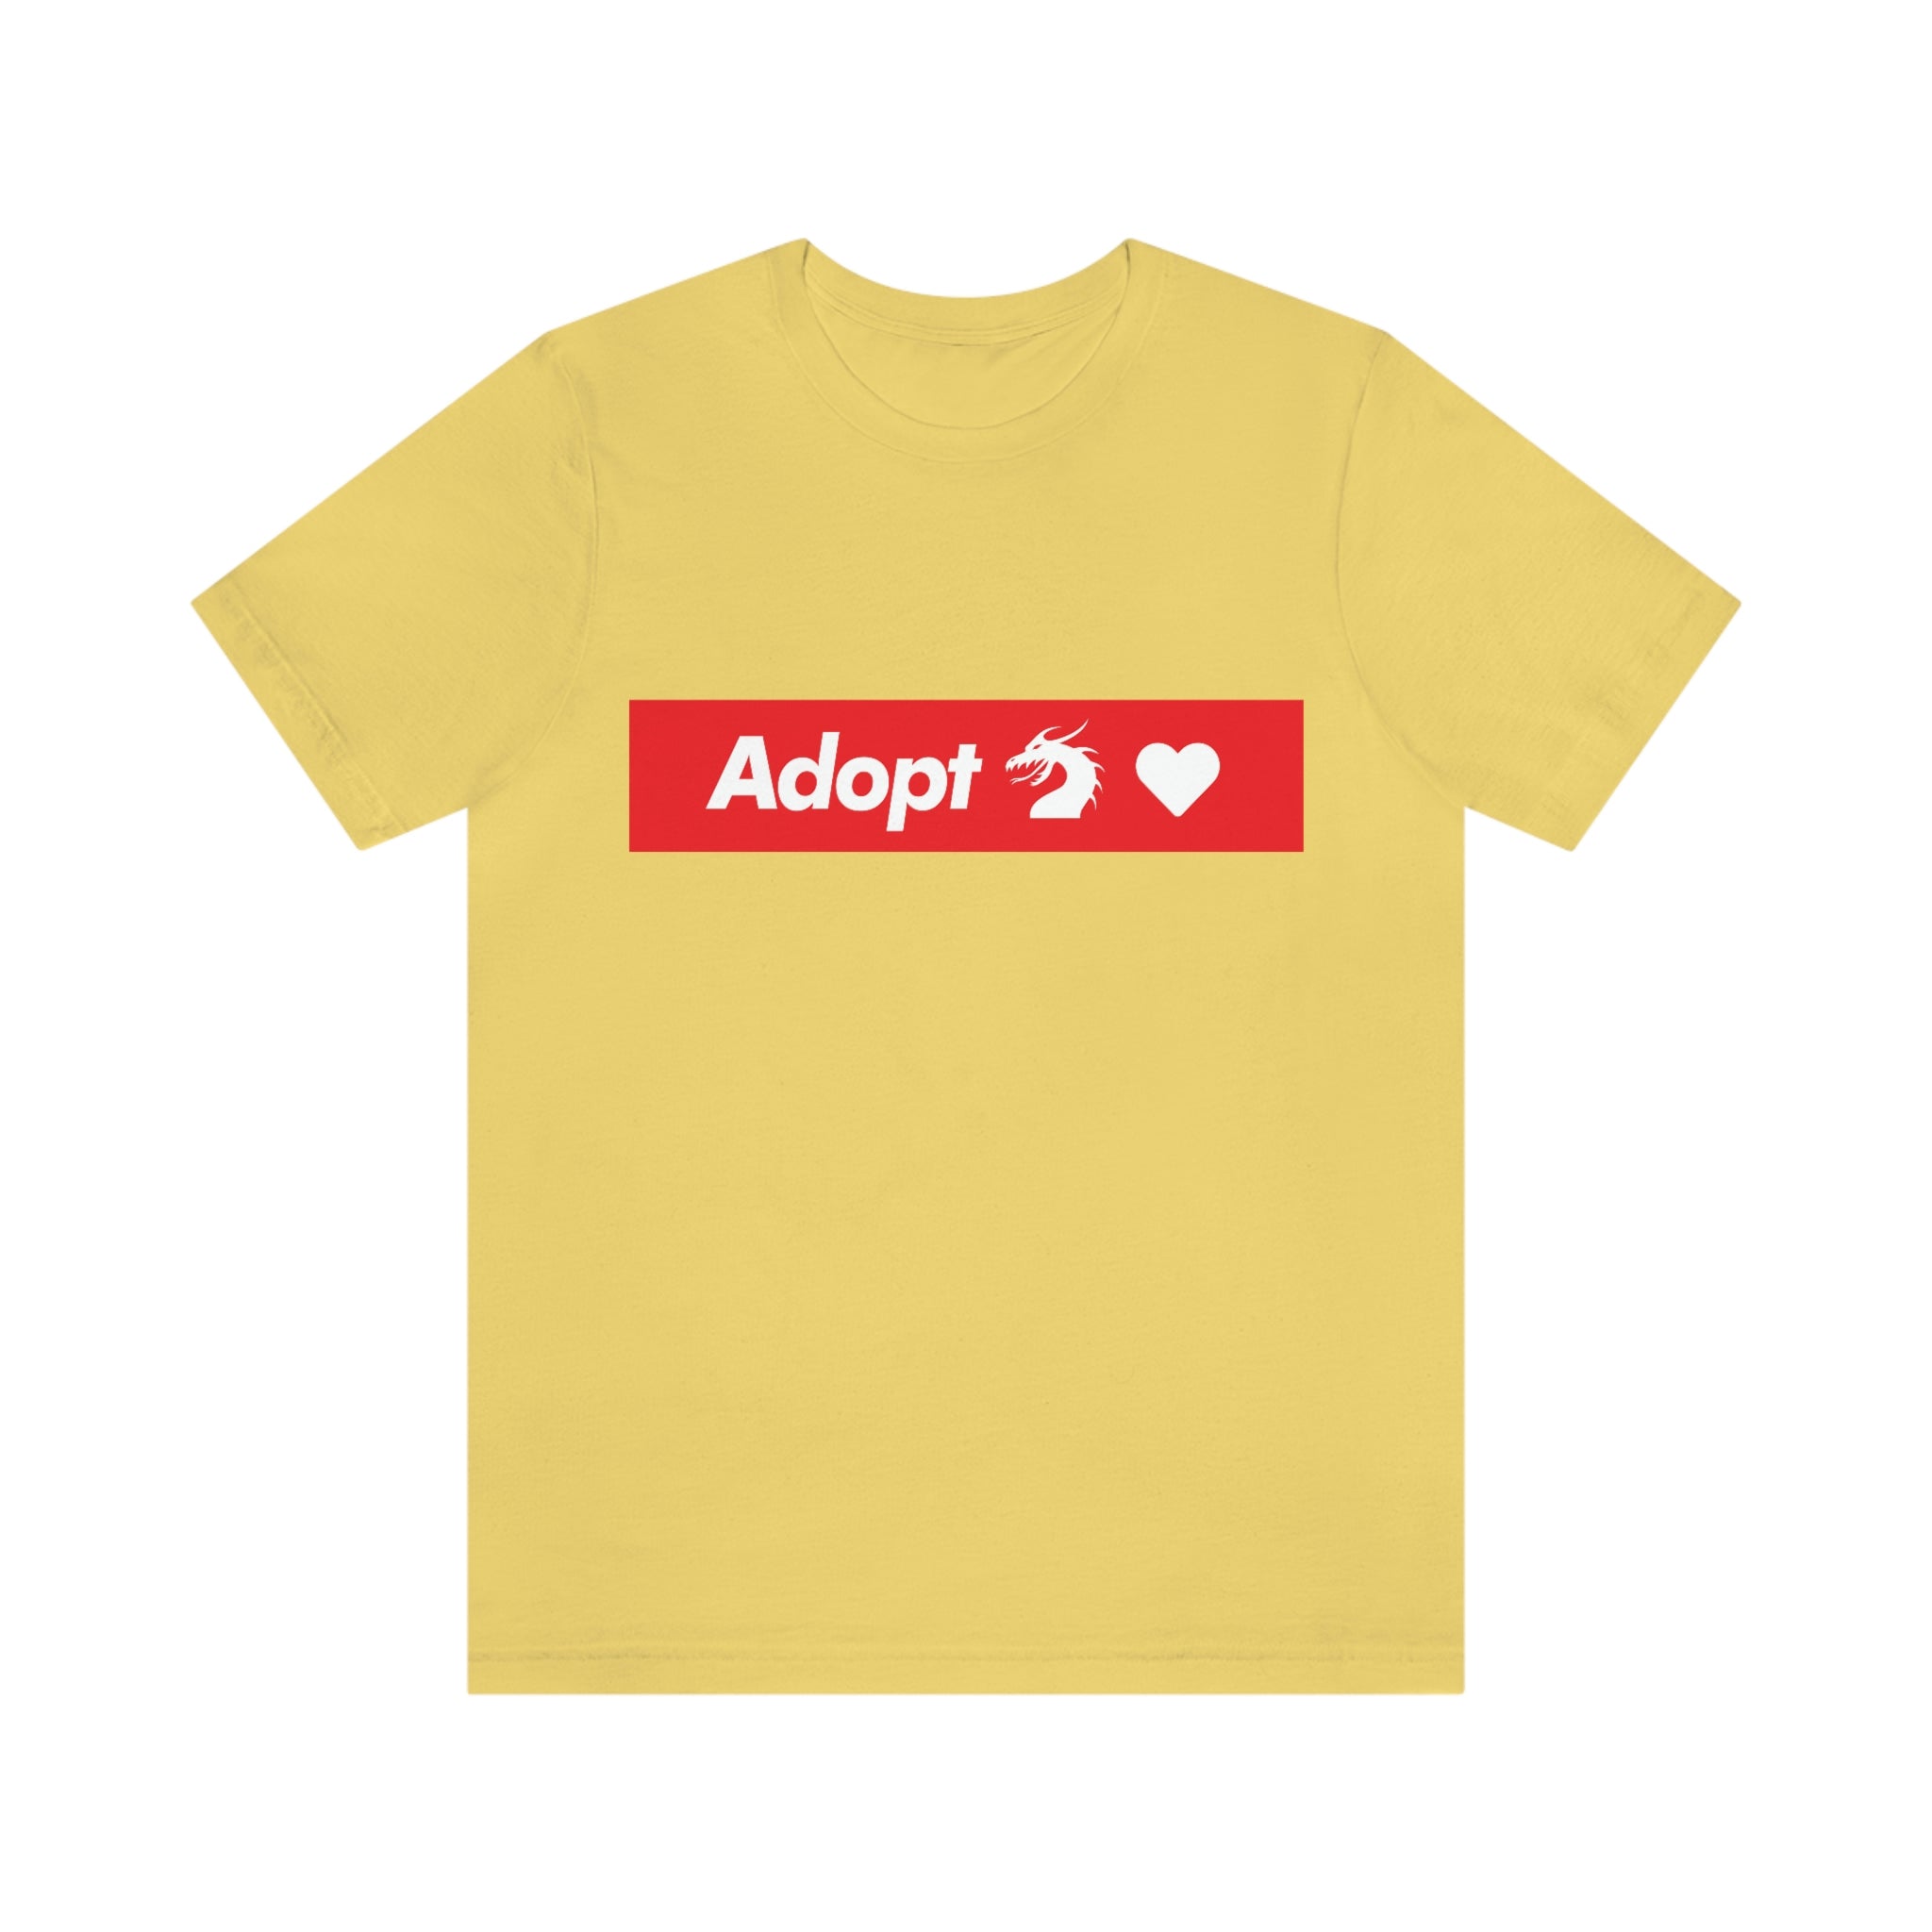 Adopt Love Rescue Dragon! RED BANNER - Unisex 100% Cotton T-Shirt Supporting Humane Animal Shelters